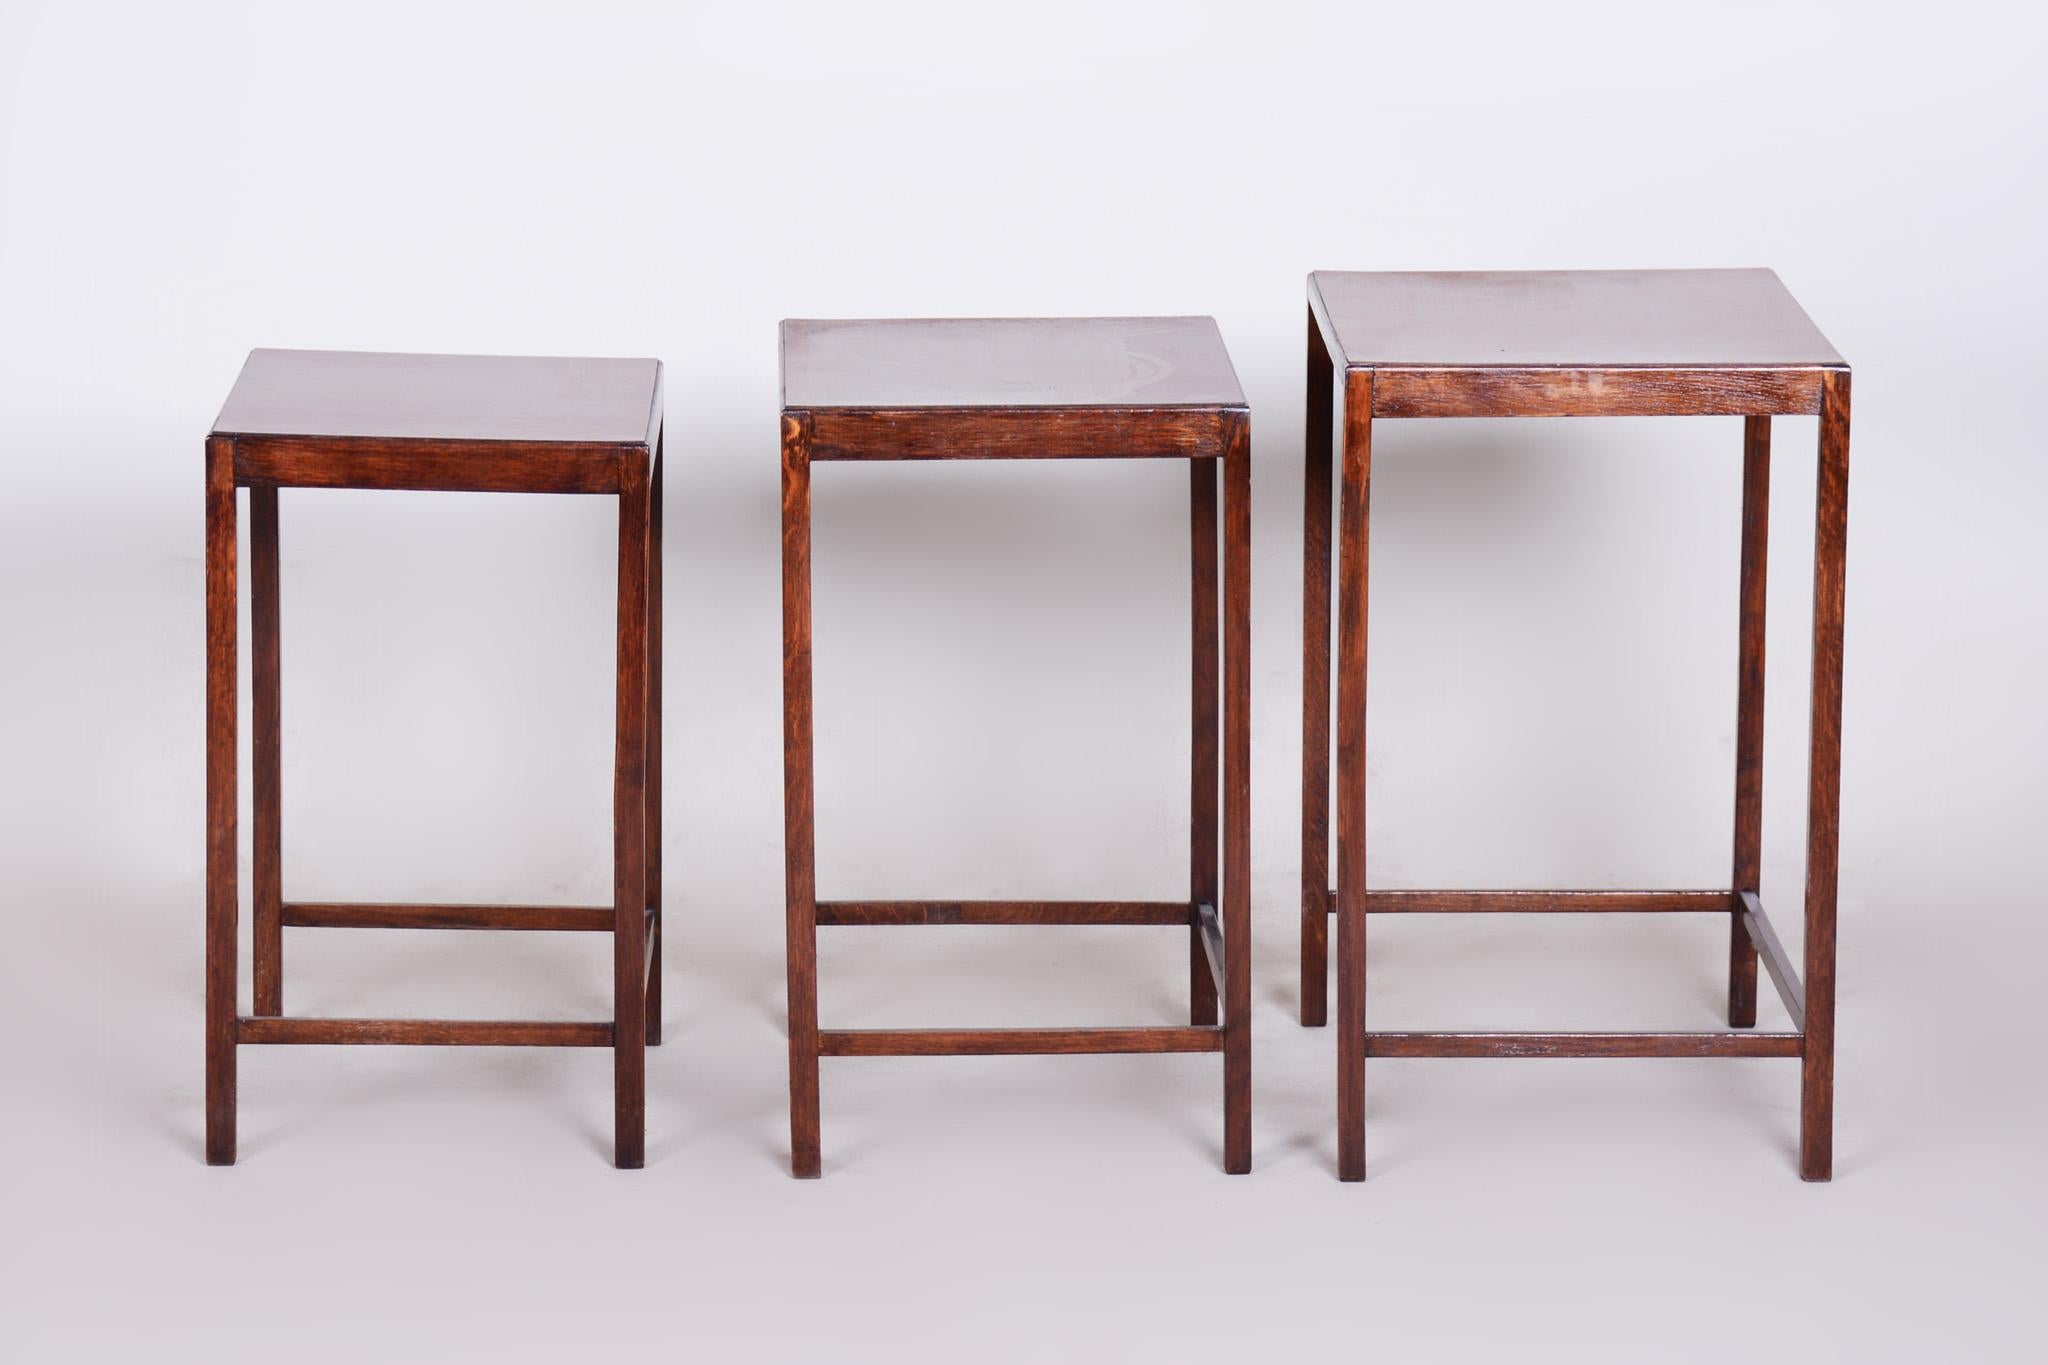 Original Condition Brown Nest Tables Made in the 1930s by Halabala, Czech 1